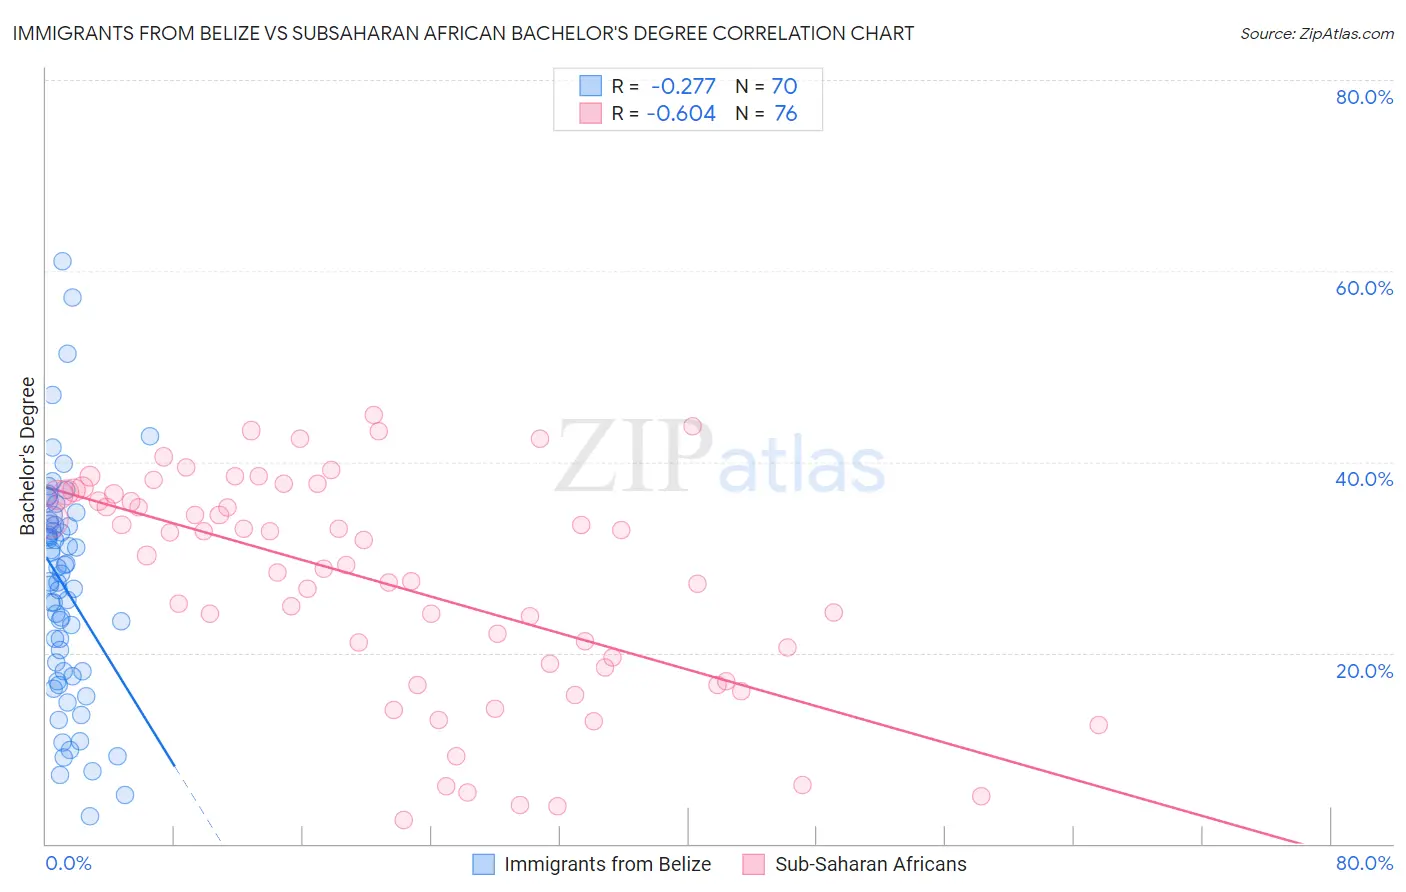 Immigrants from Belize vs Subsaharan African Bachelor's Degree